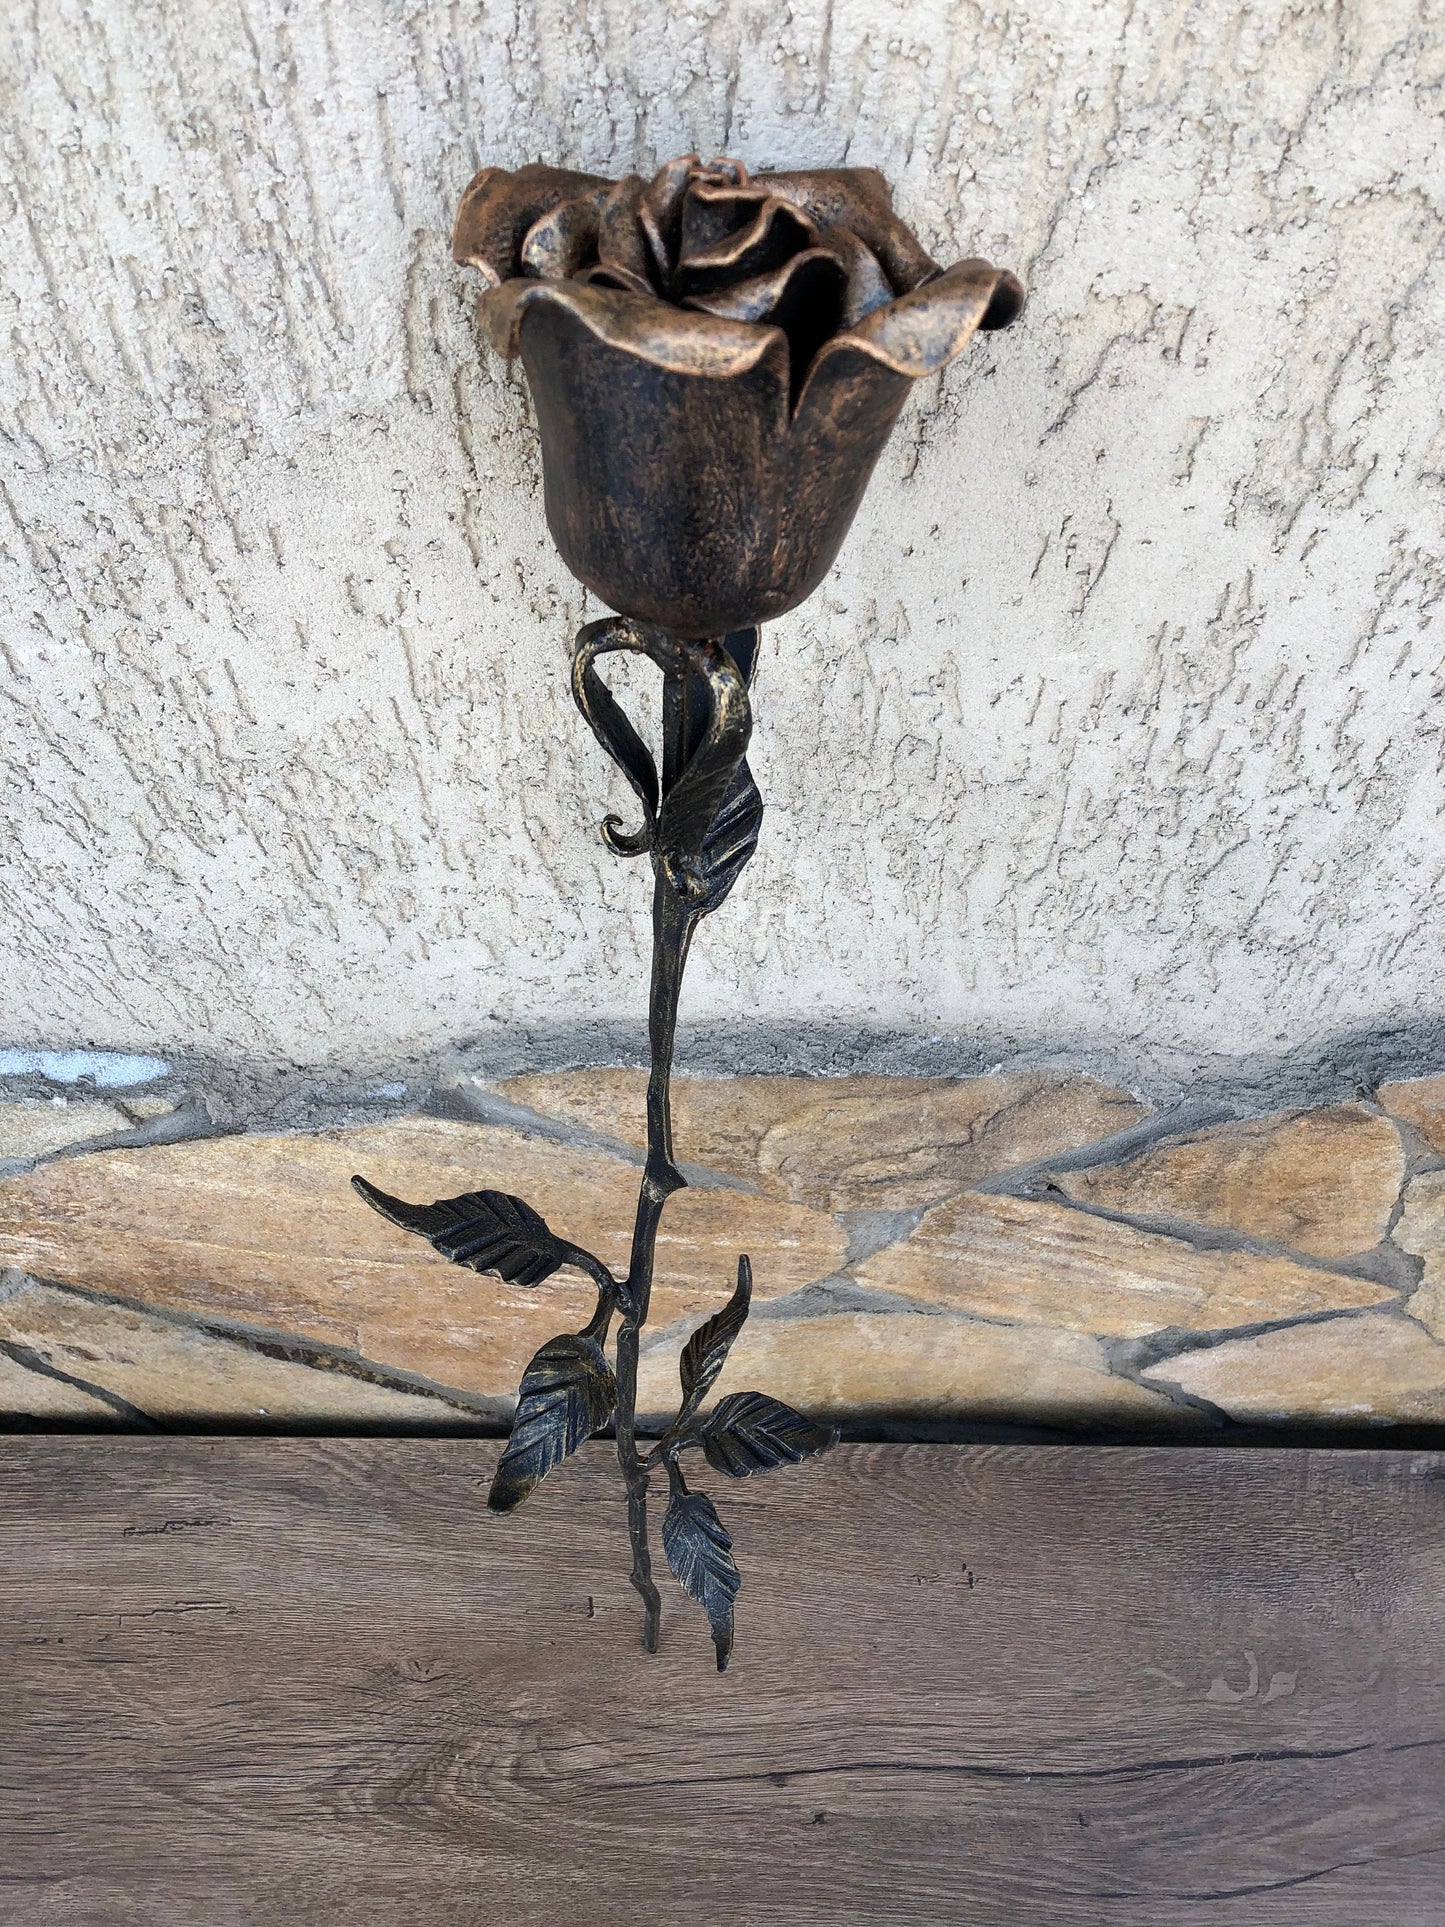 Forged rose, steampunk furniture, iron anniversary gift for her, metal sculpture, wrought iron gift for her, metal statue, anniversary gift